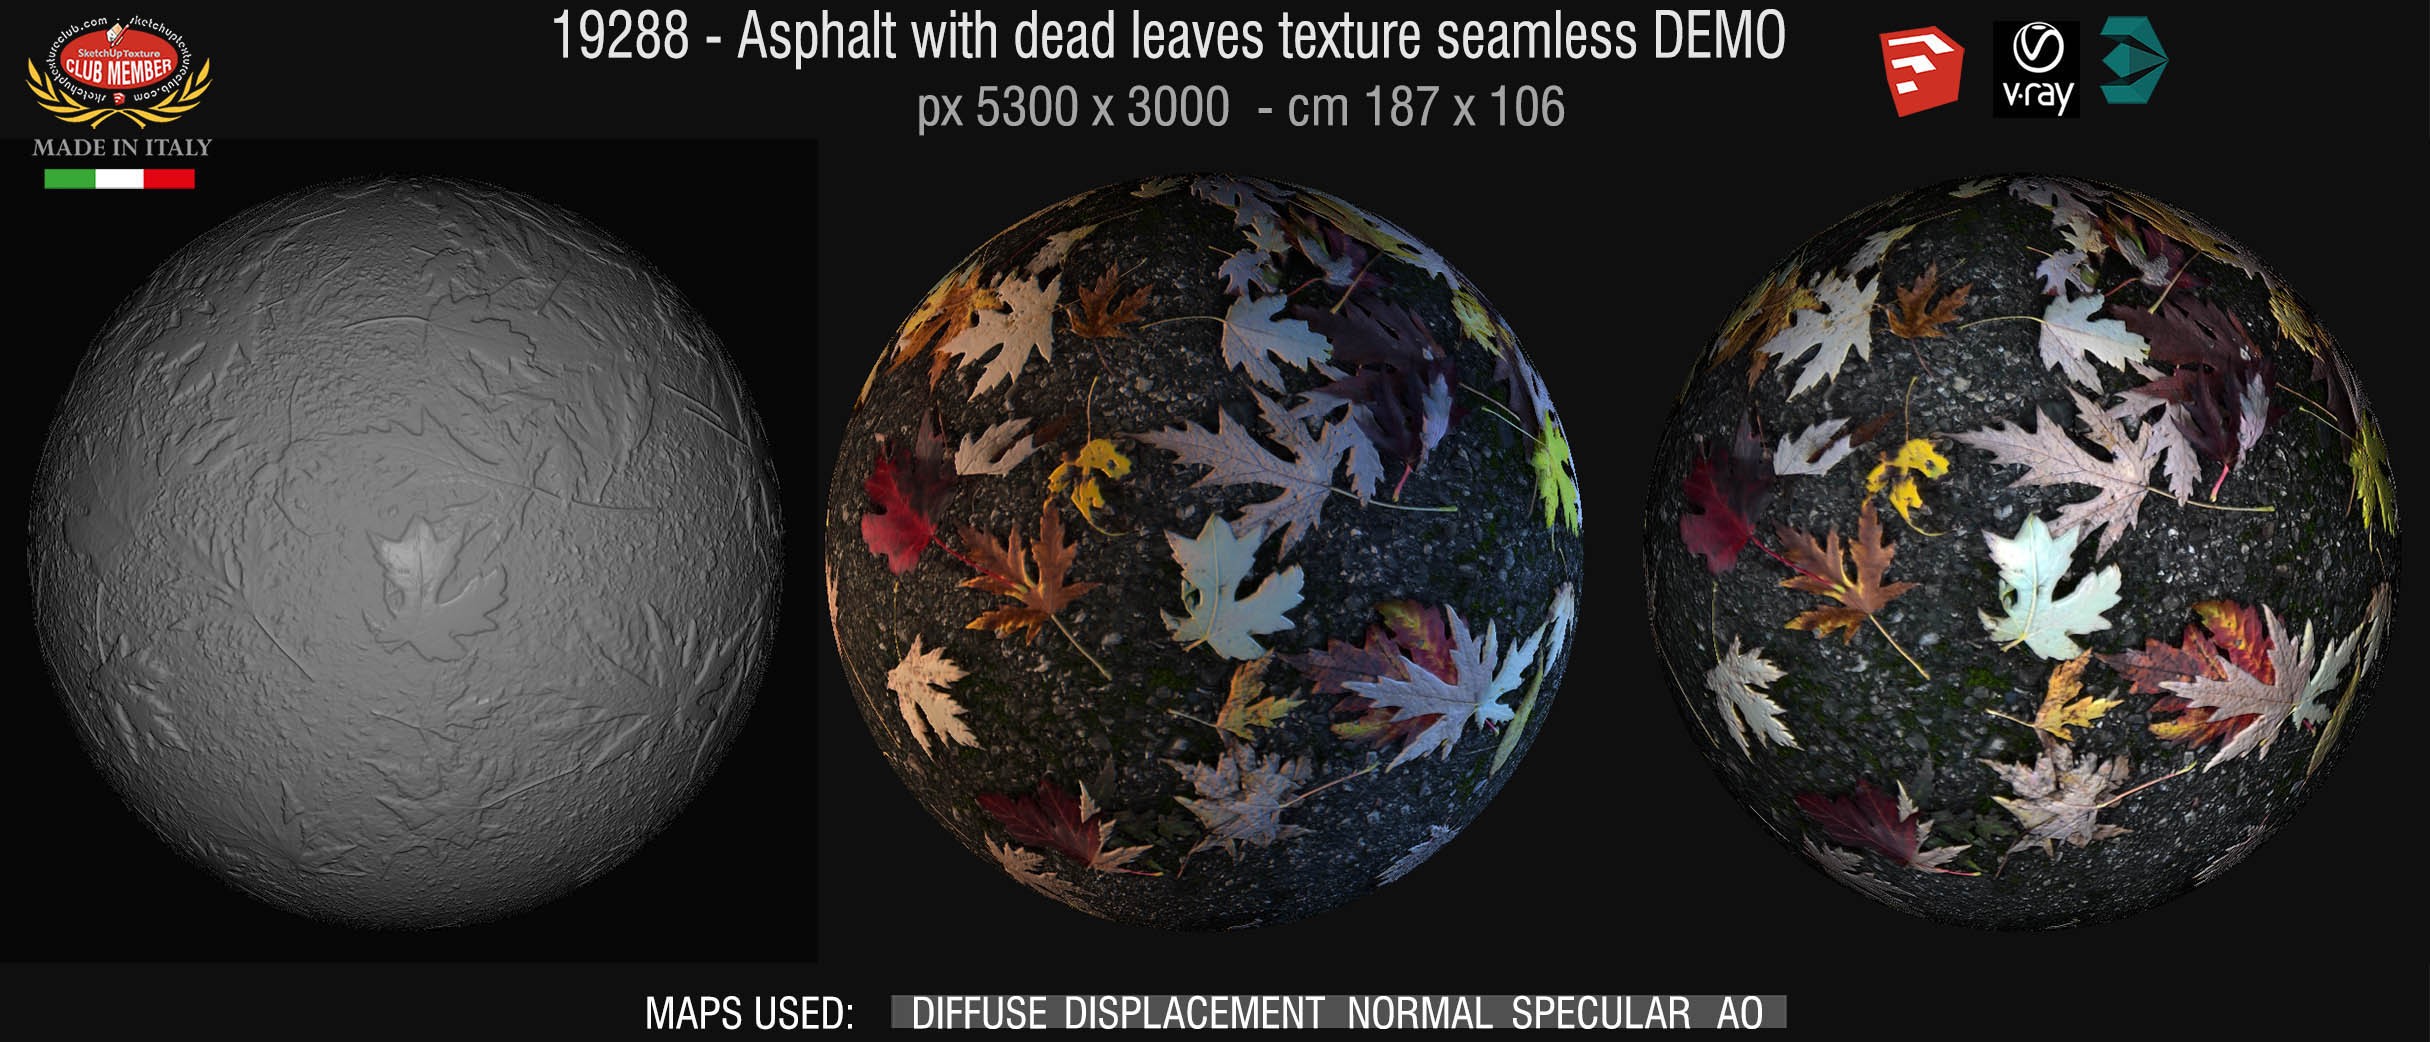 19288 Asphalt with dead leaves texture seamless + maps DEMO